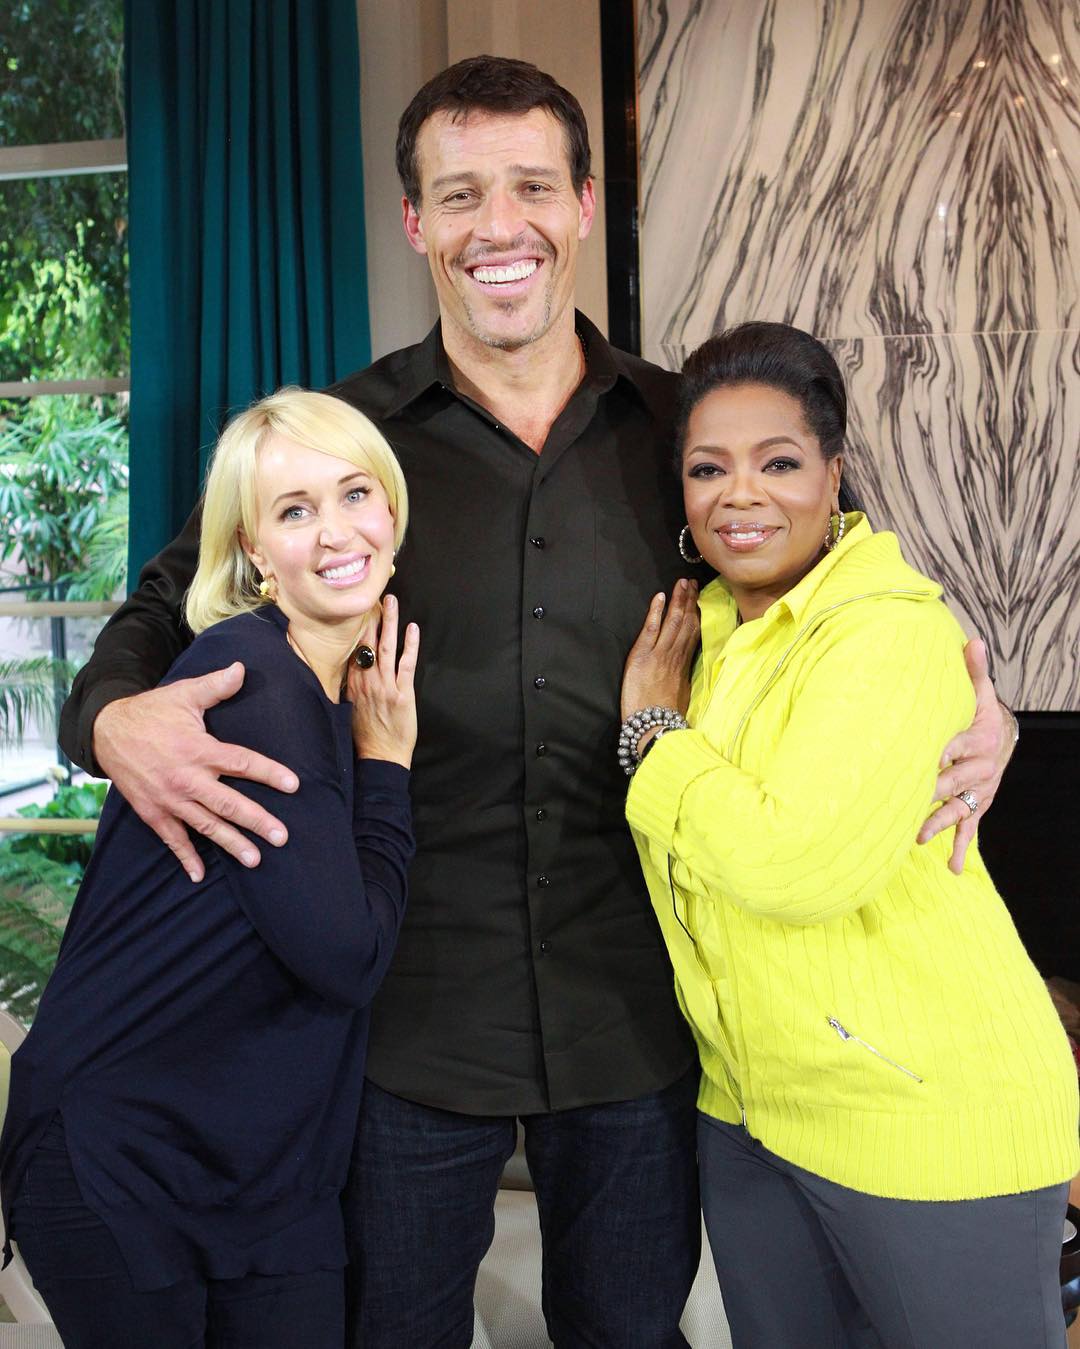 N/A: Tony Robbins. Images of interest. His instagram.